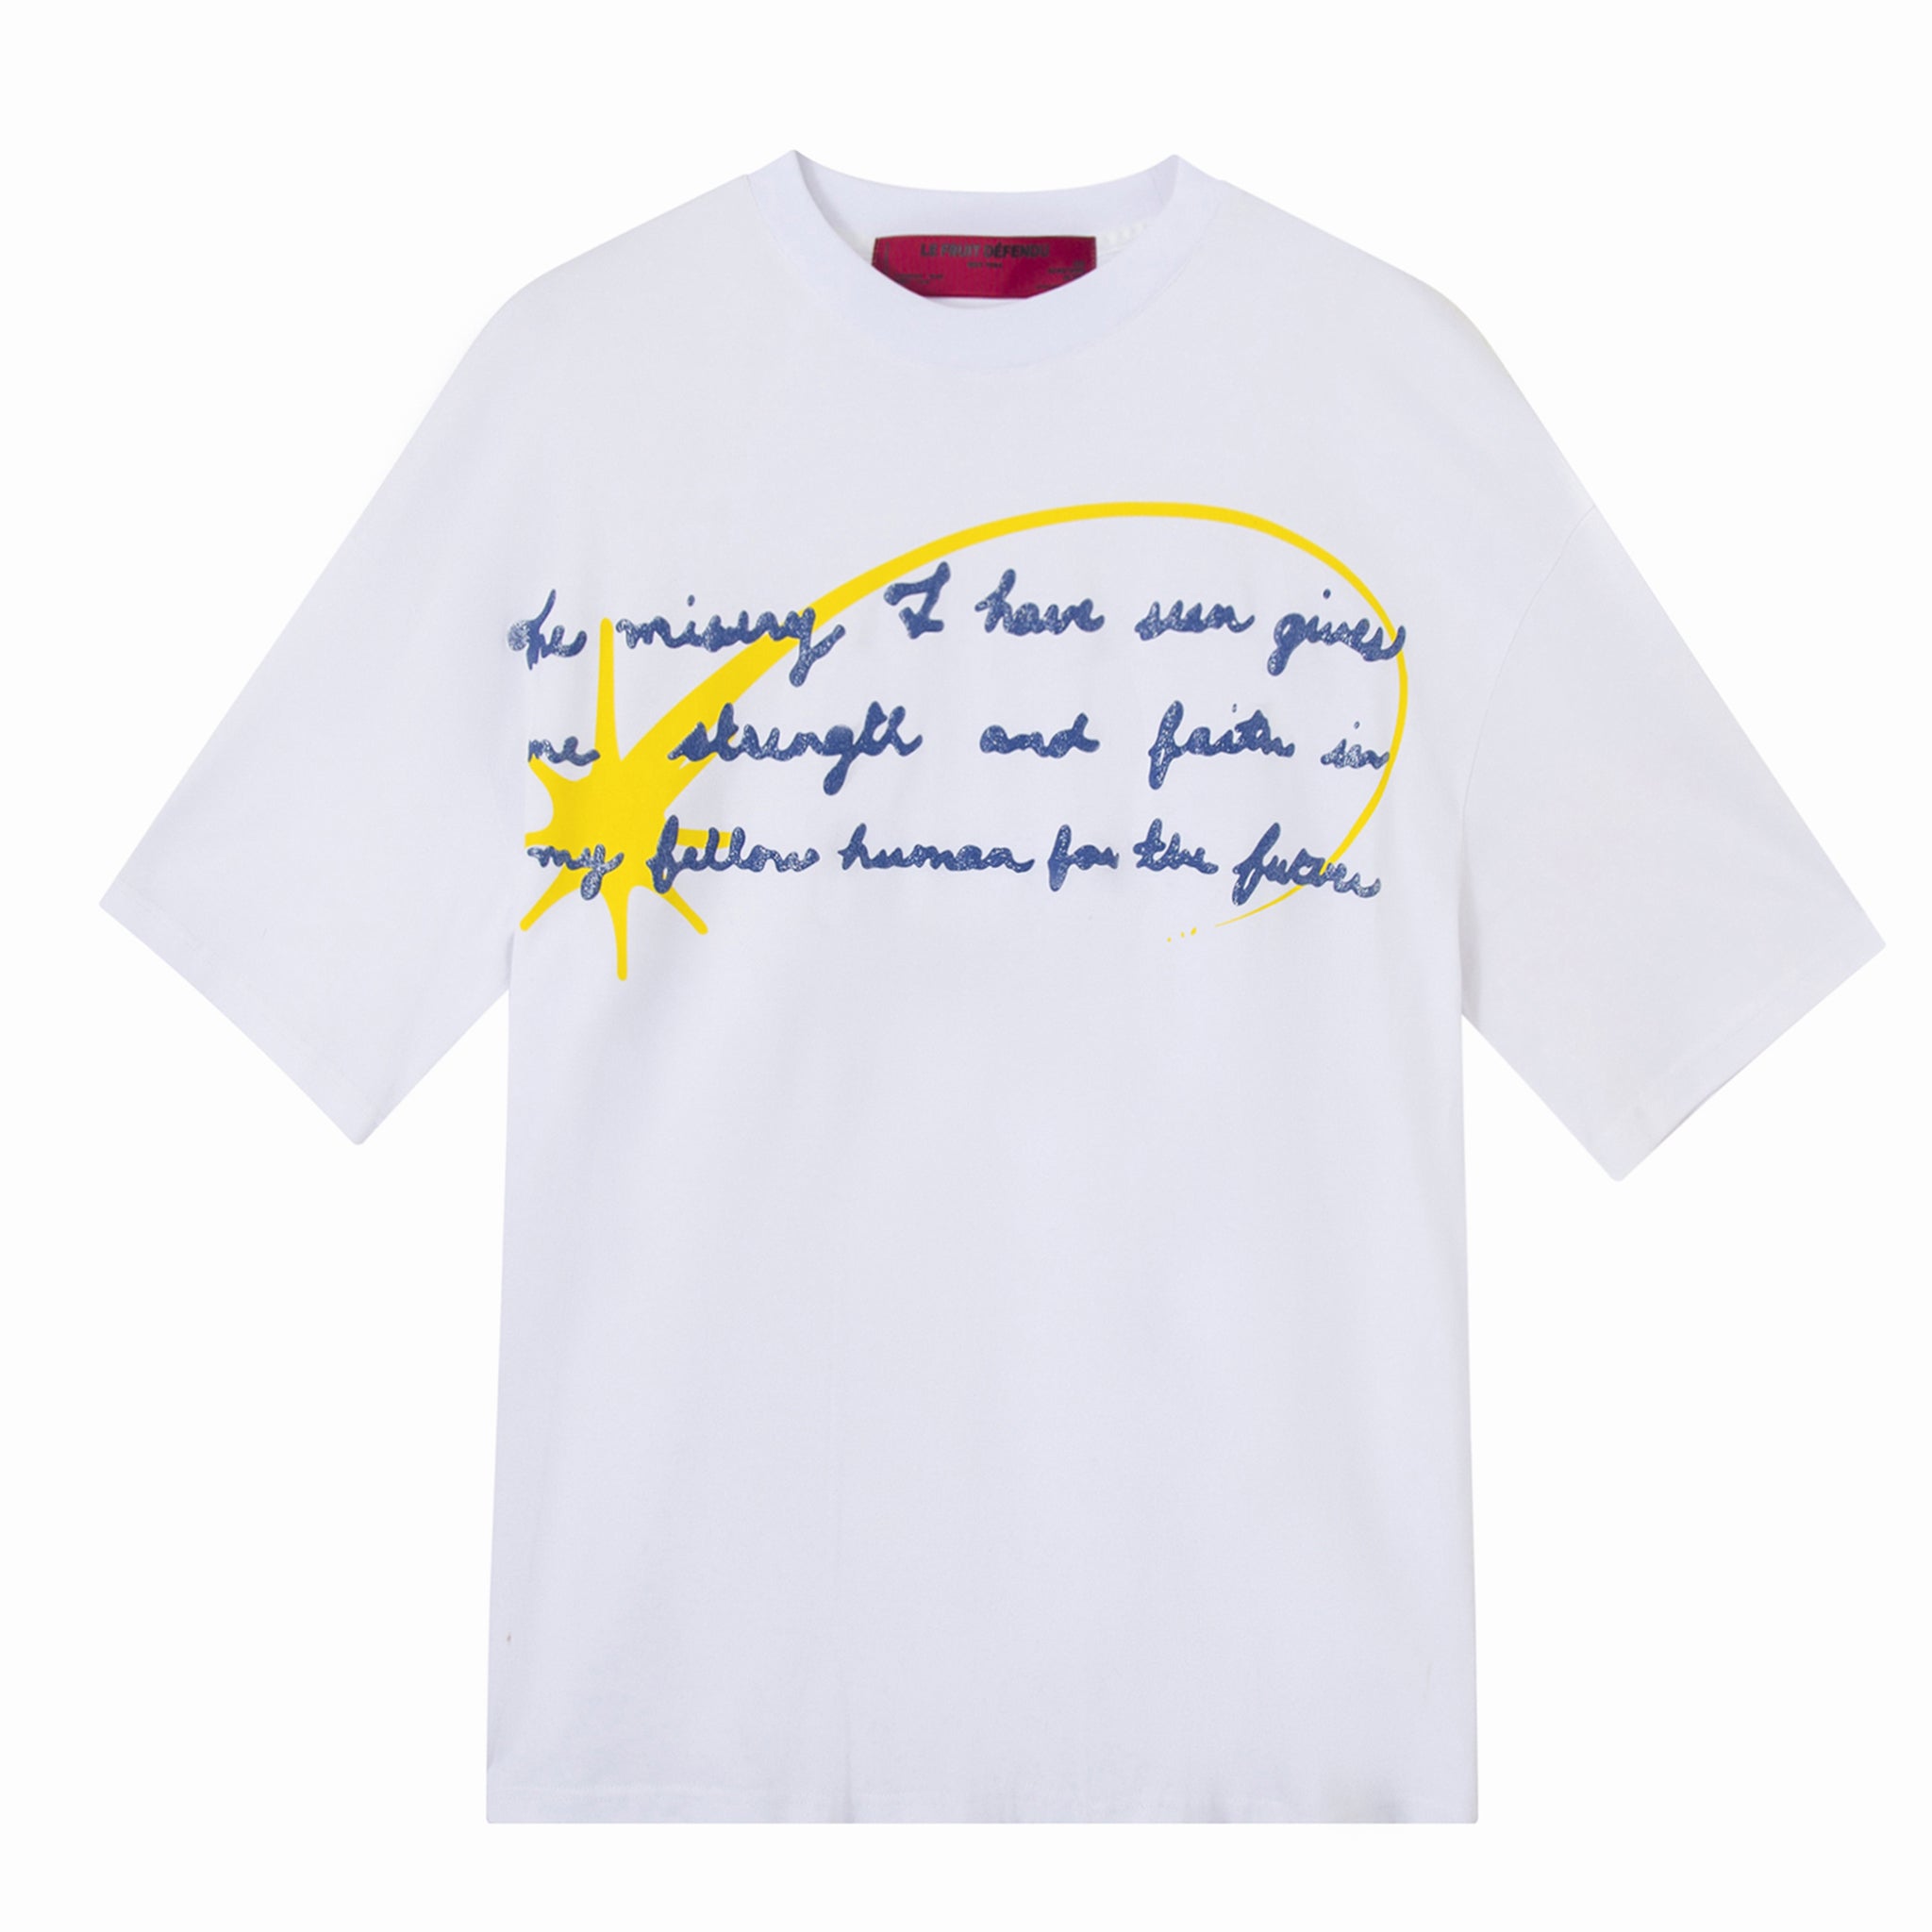 Load image into Gallery viewer, Le Fruit Defendu Ring Dance T-Shirt - White